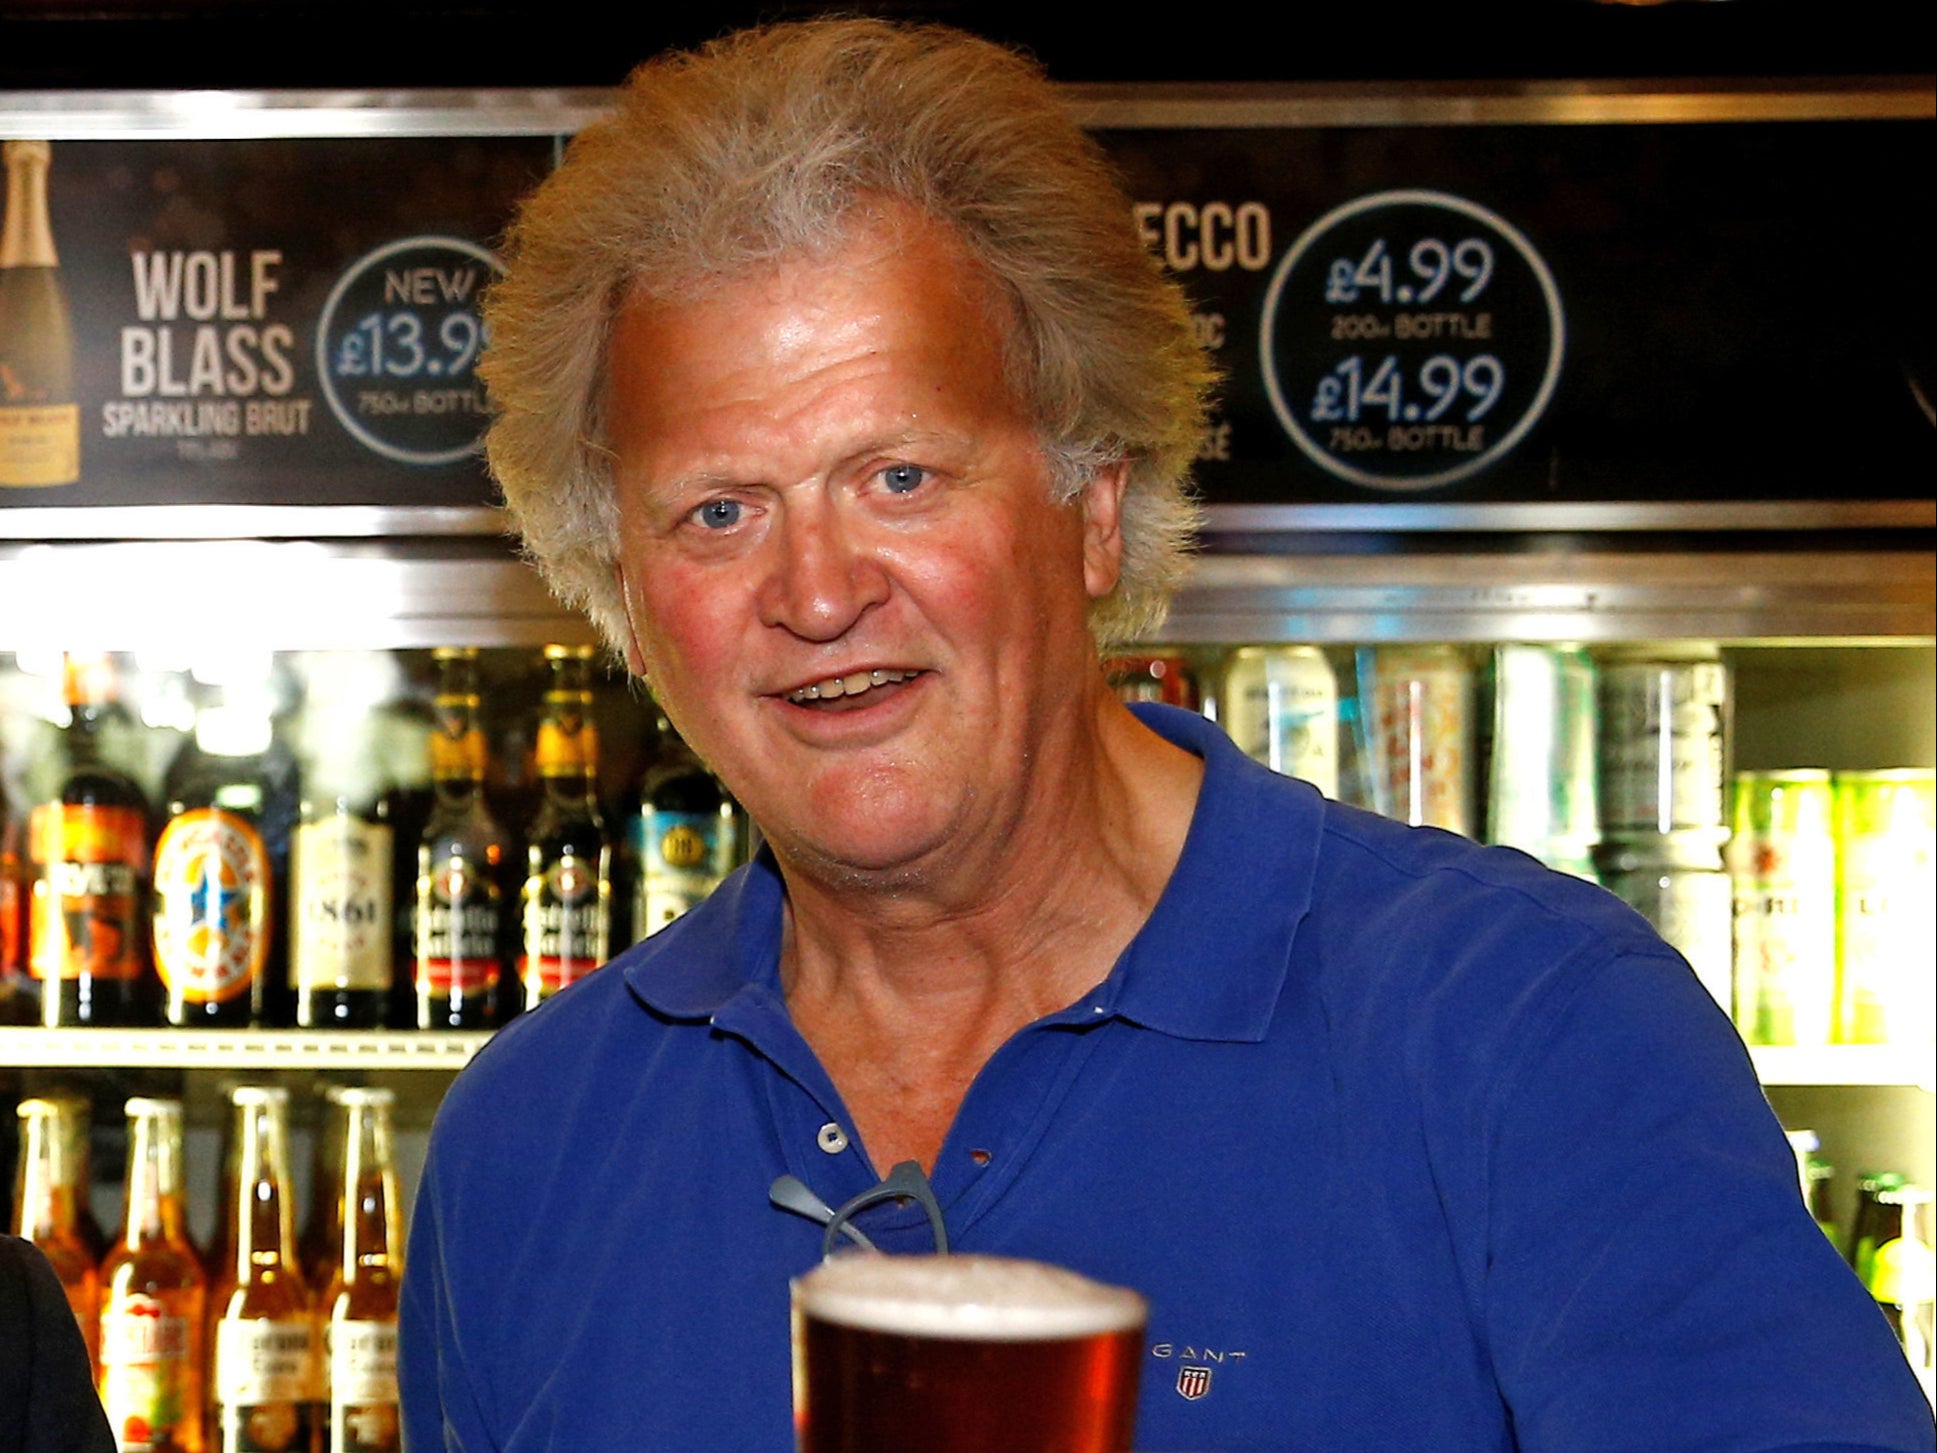 JD Wetherspoon boss Tim Martin was a vocal supporter of Brexit